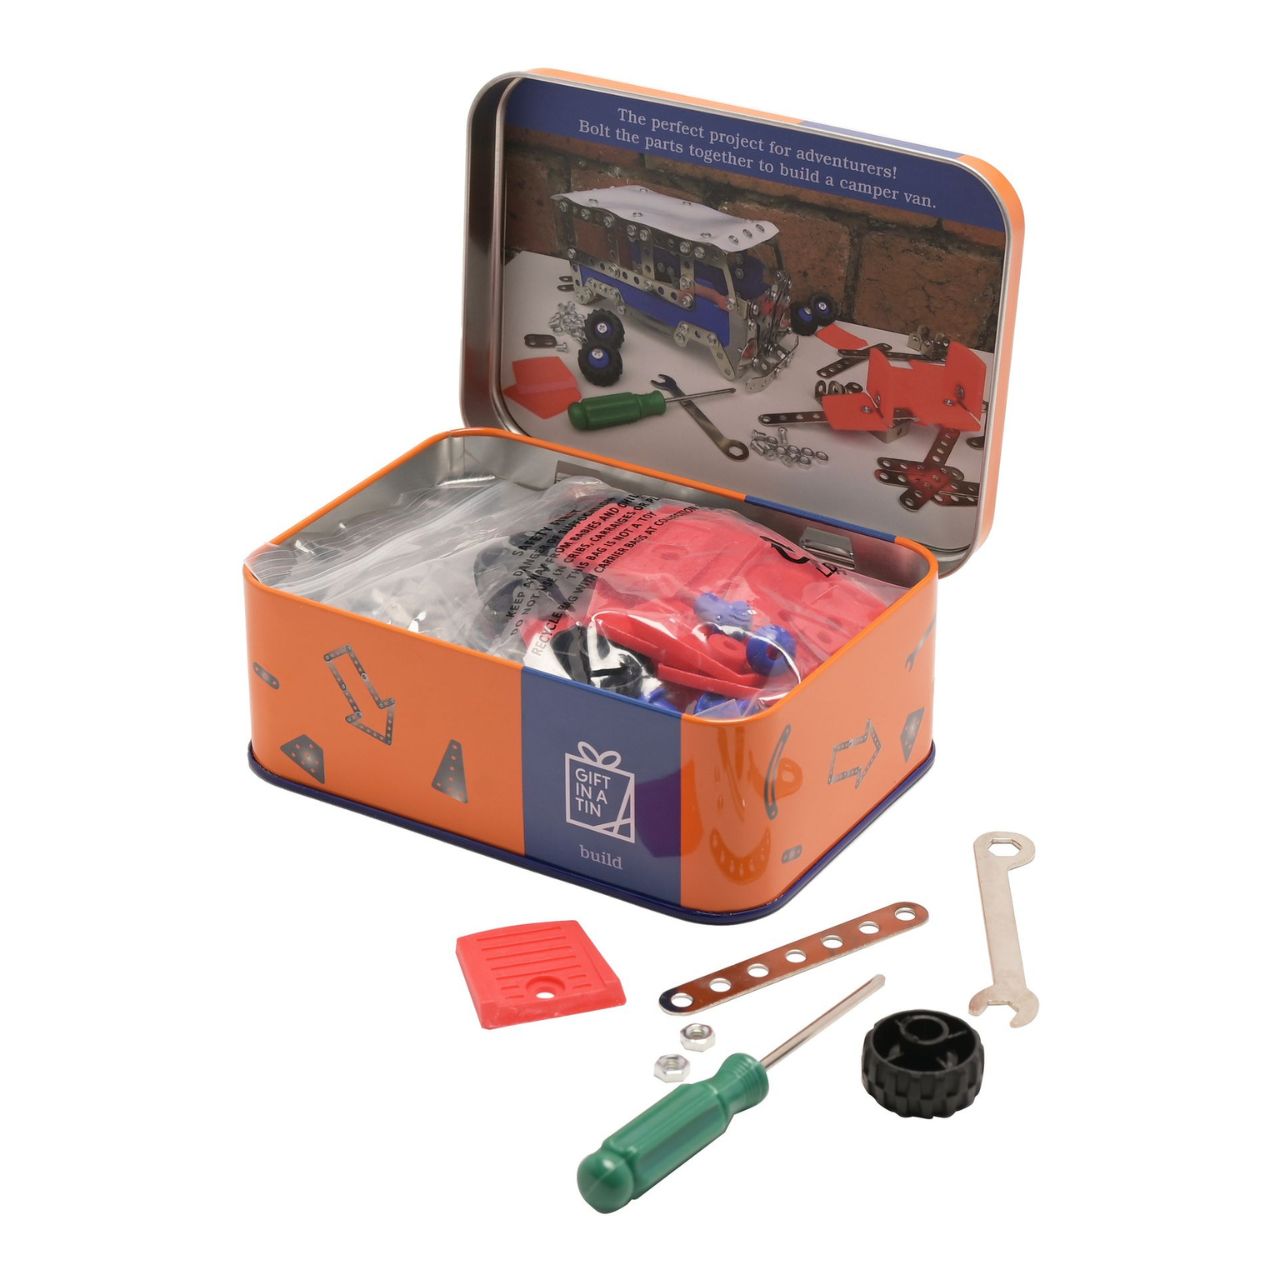 Camper Van Construction Kit - Apples To Pears Gift In A Tin  A camper van construction kit from Gift in a Tin by APPLES TO PEARS®.  This mind-enhancing set is perfect for any aspiring young engineer who wants to get to grips with constructing moving vehicles.